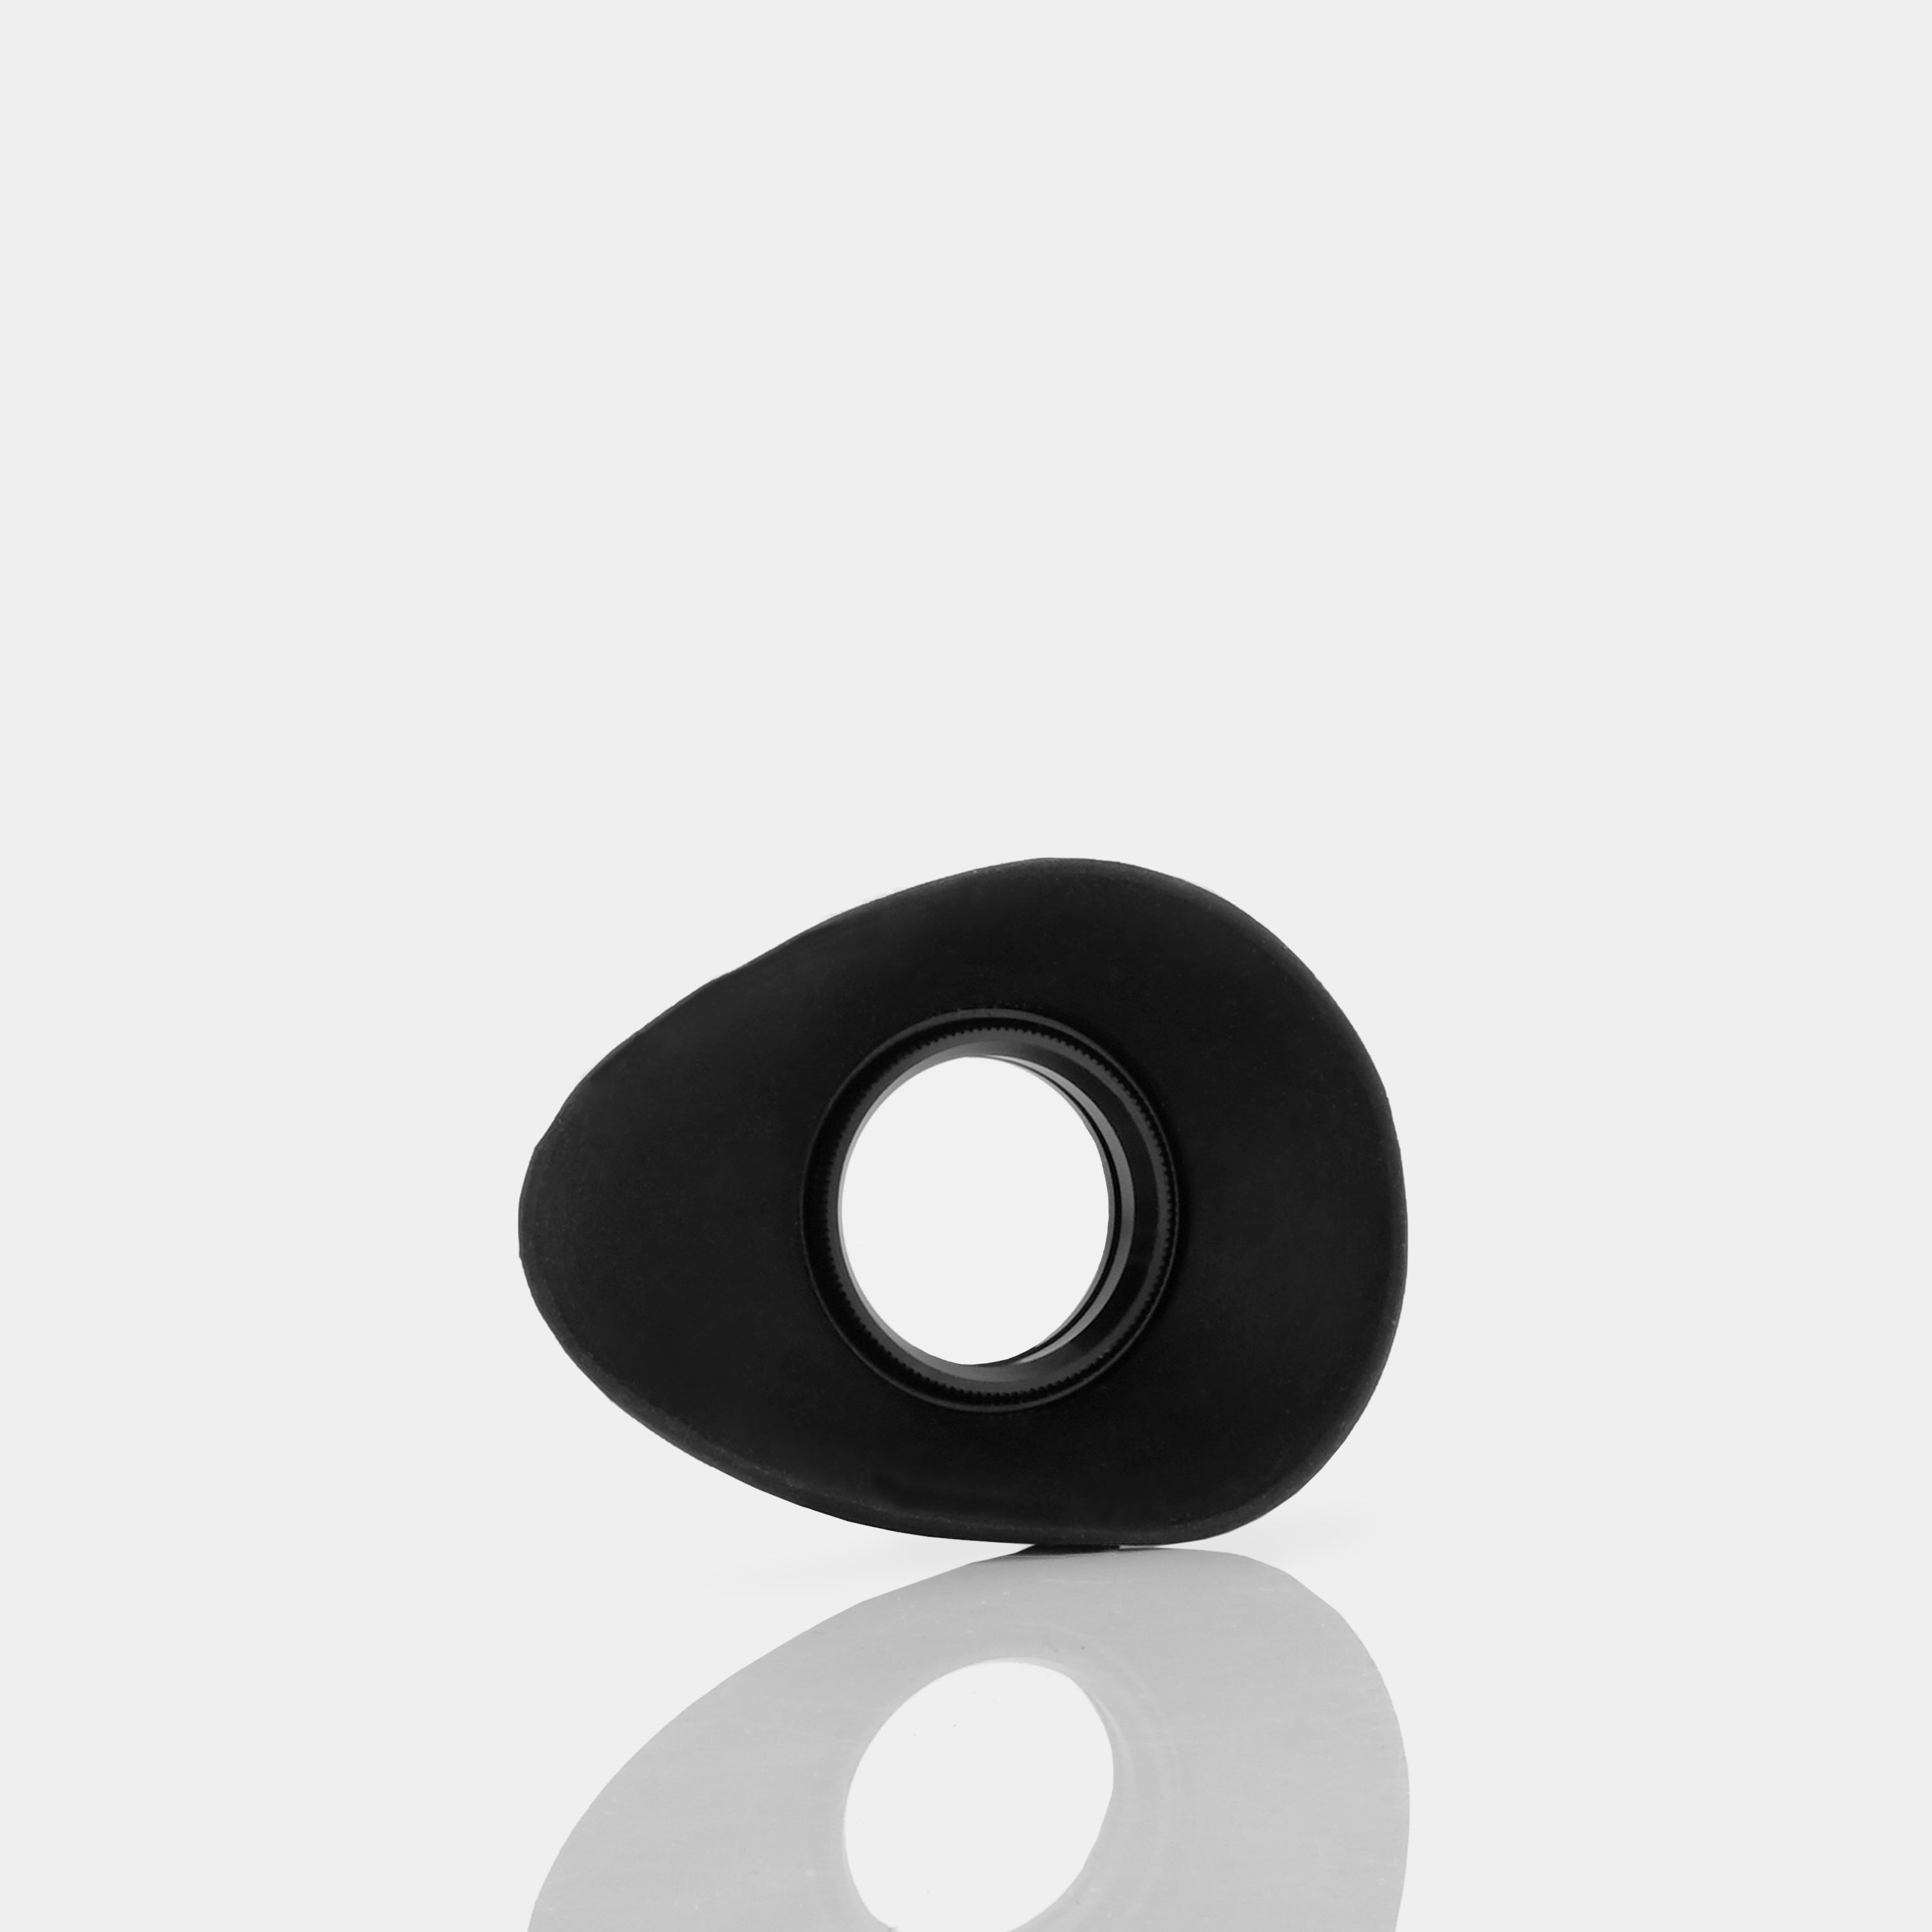 Kalt Canon AE-1 Rubber Viewfinder Eye Cup